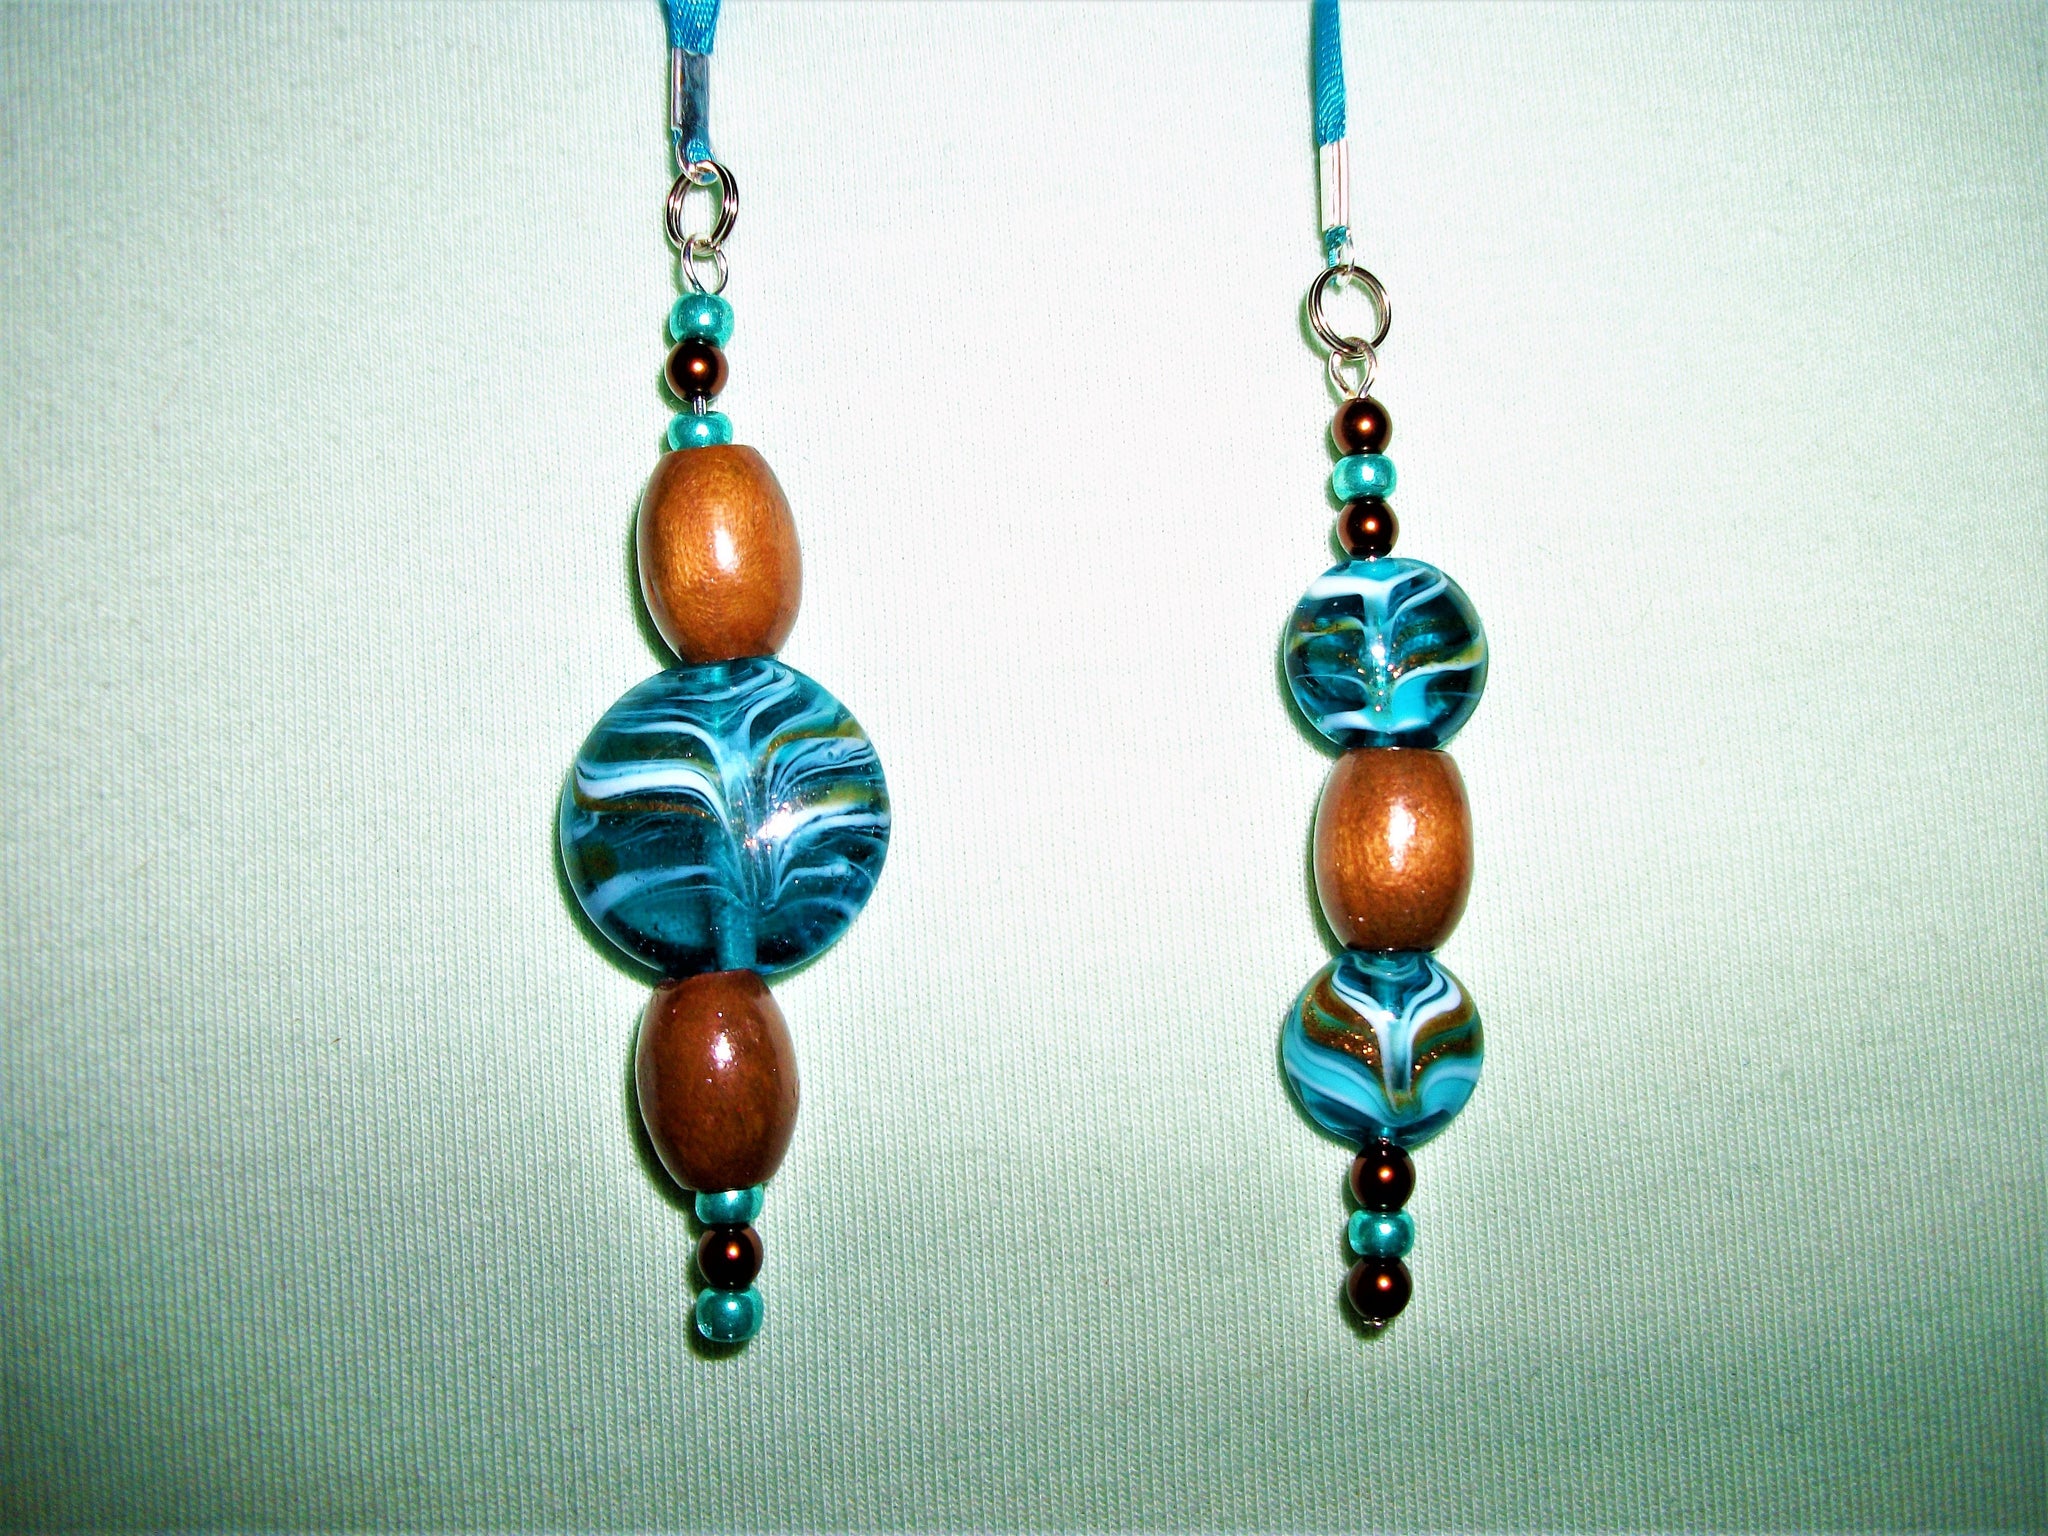 Blue bookmark with blue and brown beads